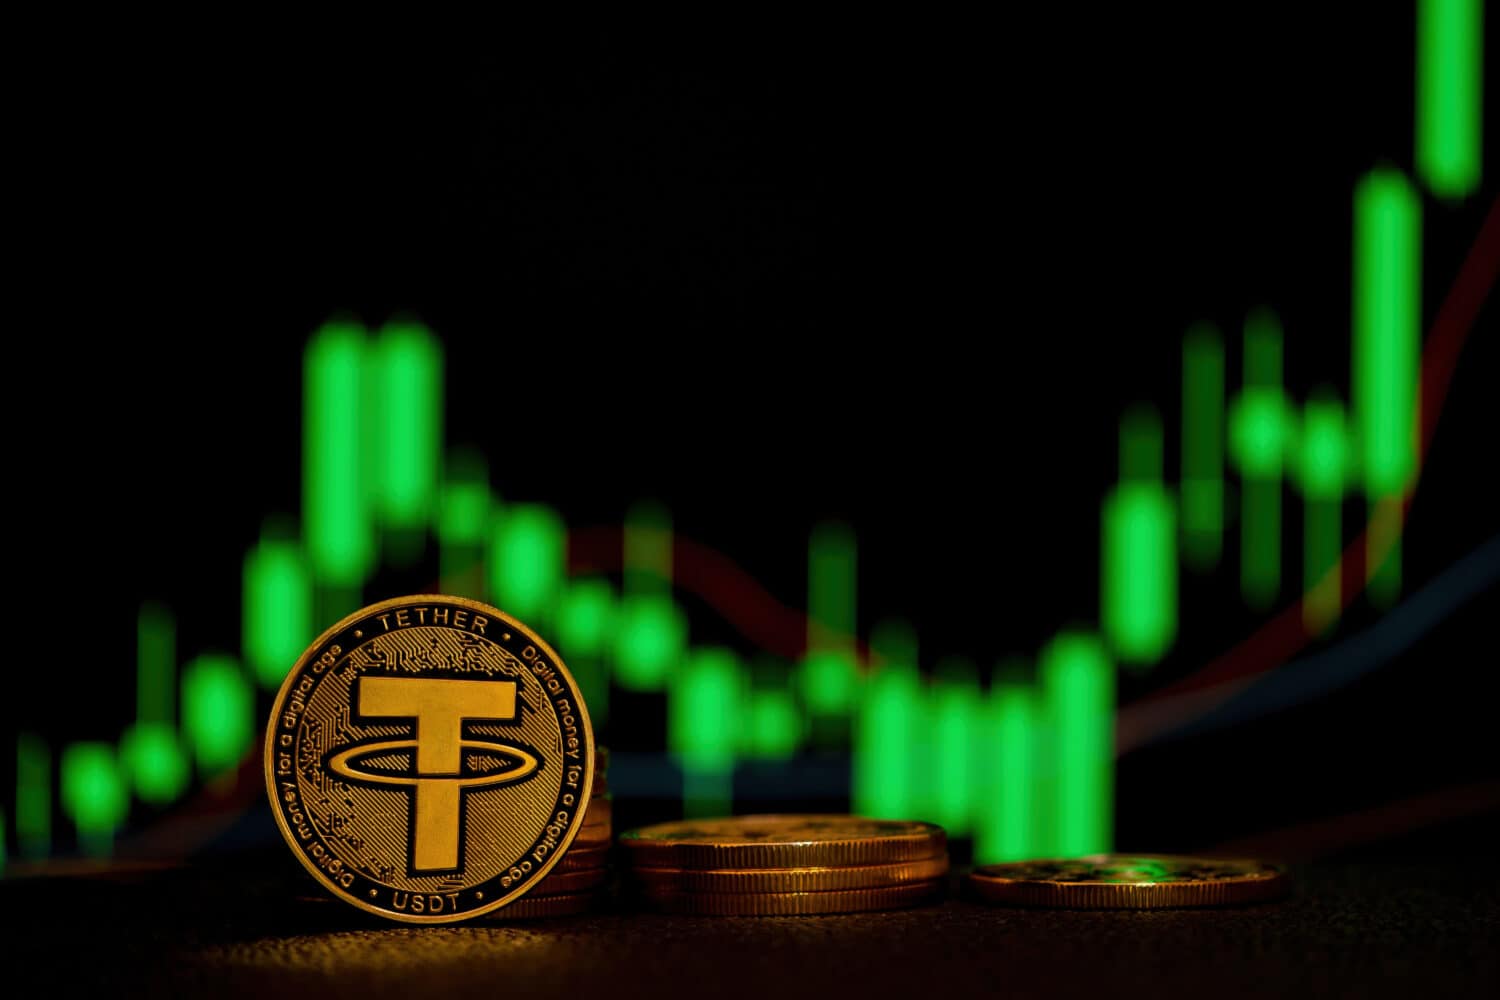 The value of the Tether coin (usdt) Crypto currency has increased.